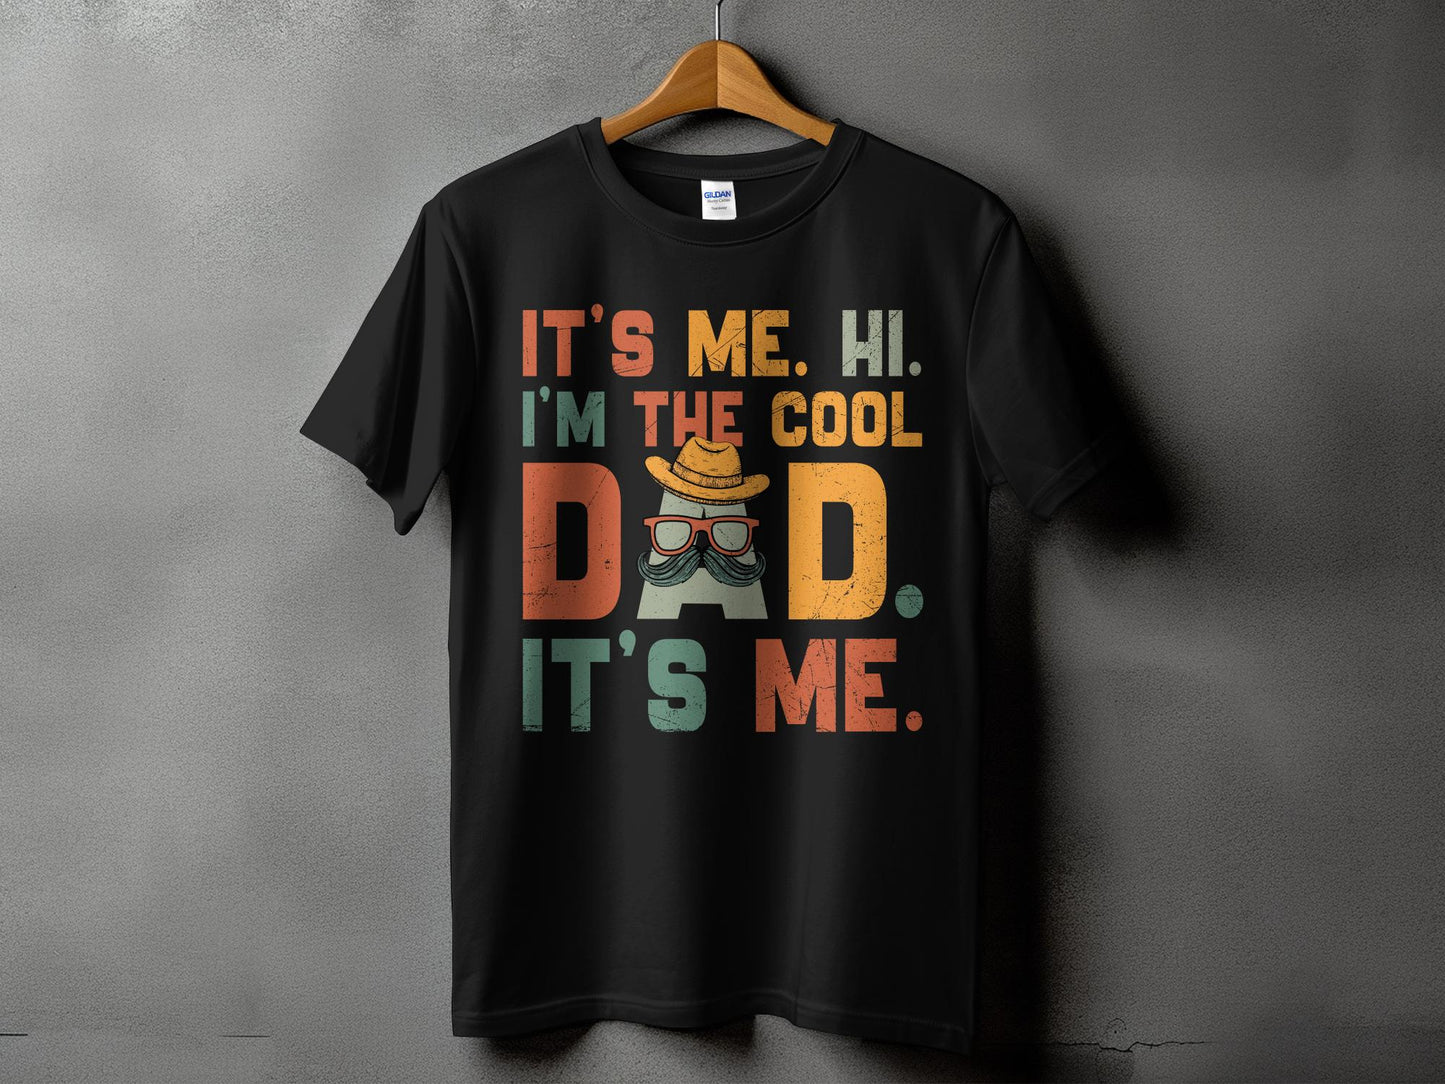 It's me...the cool dad Tshirt